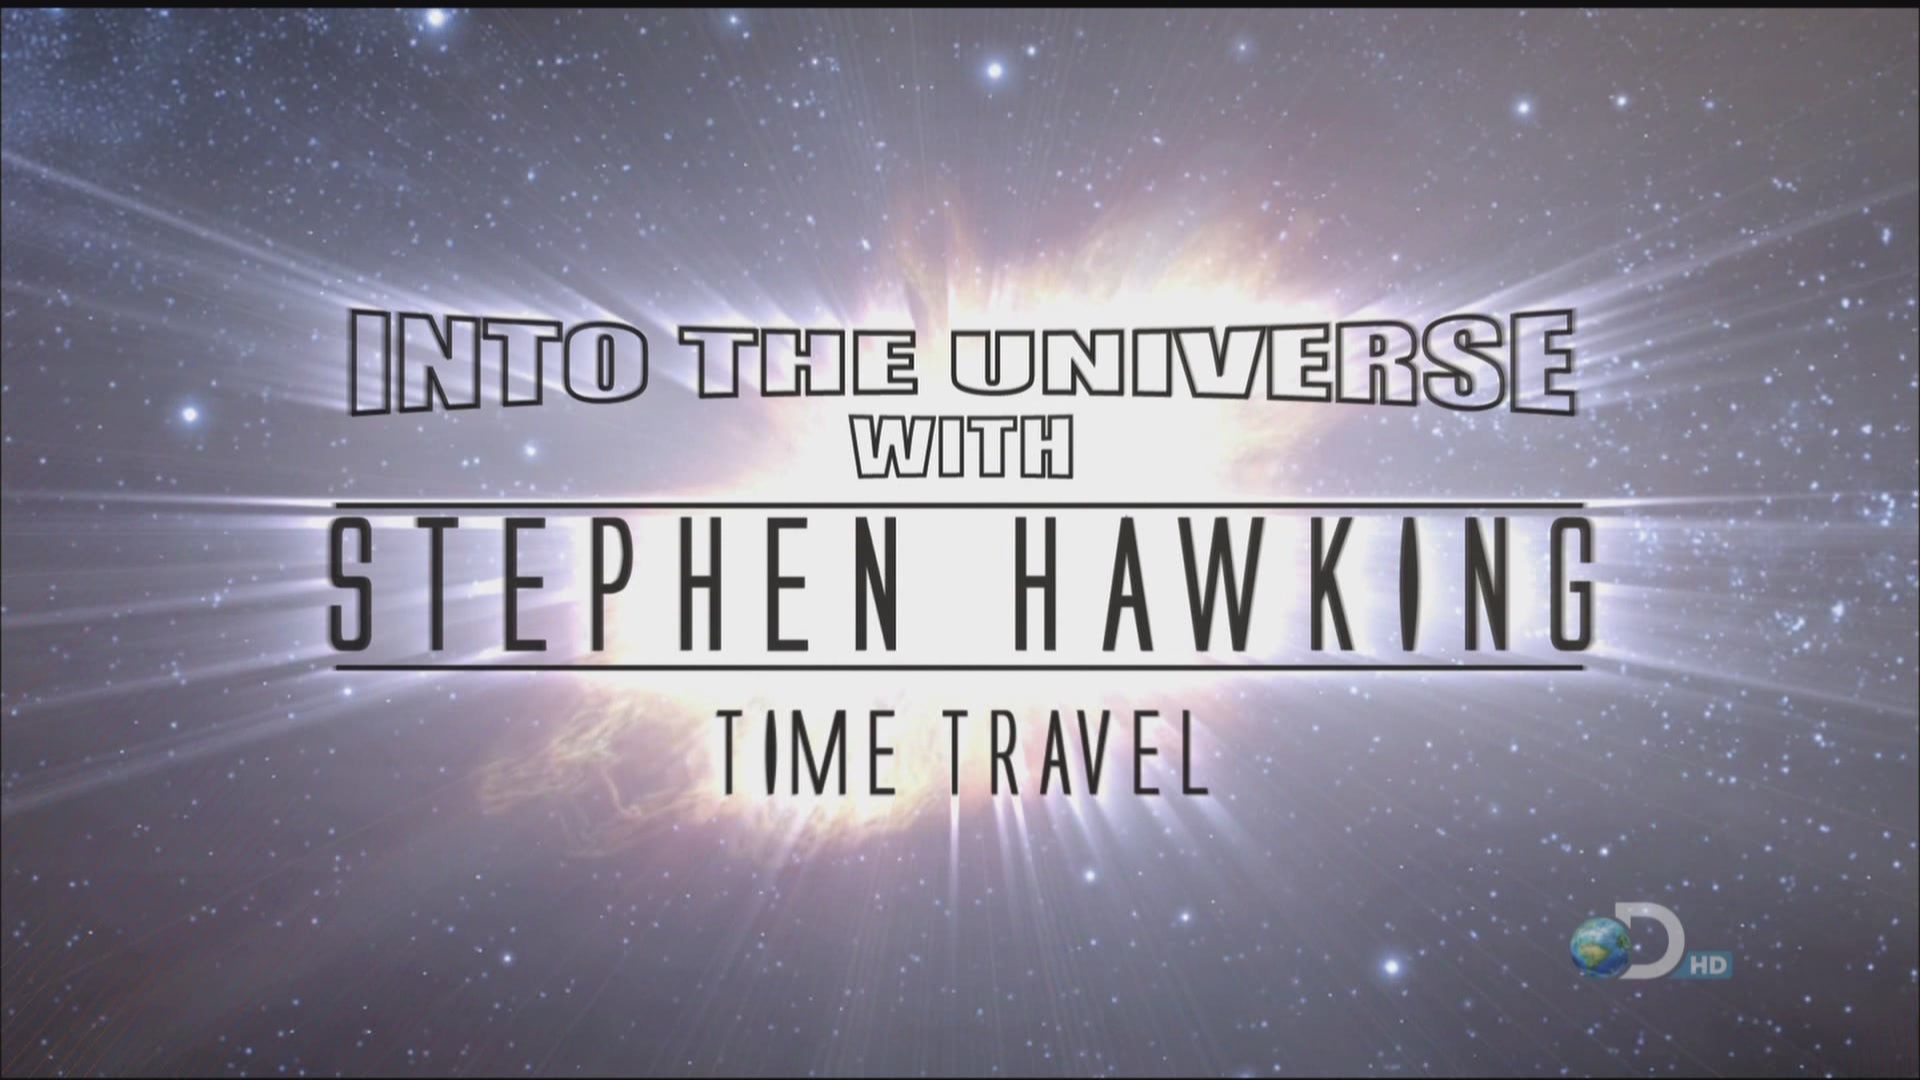 Into the Universe With Stephen Hawking S01E02 Time Travel.JPG